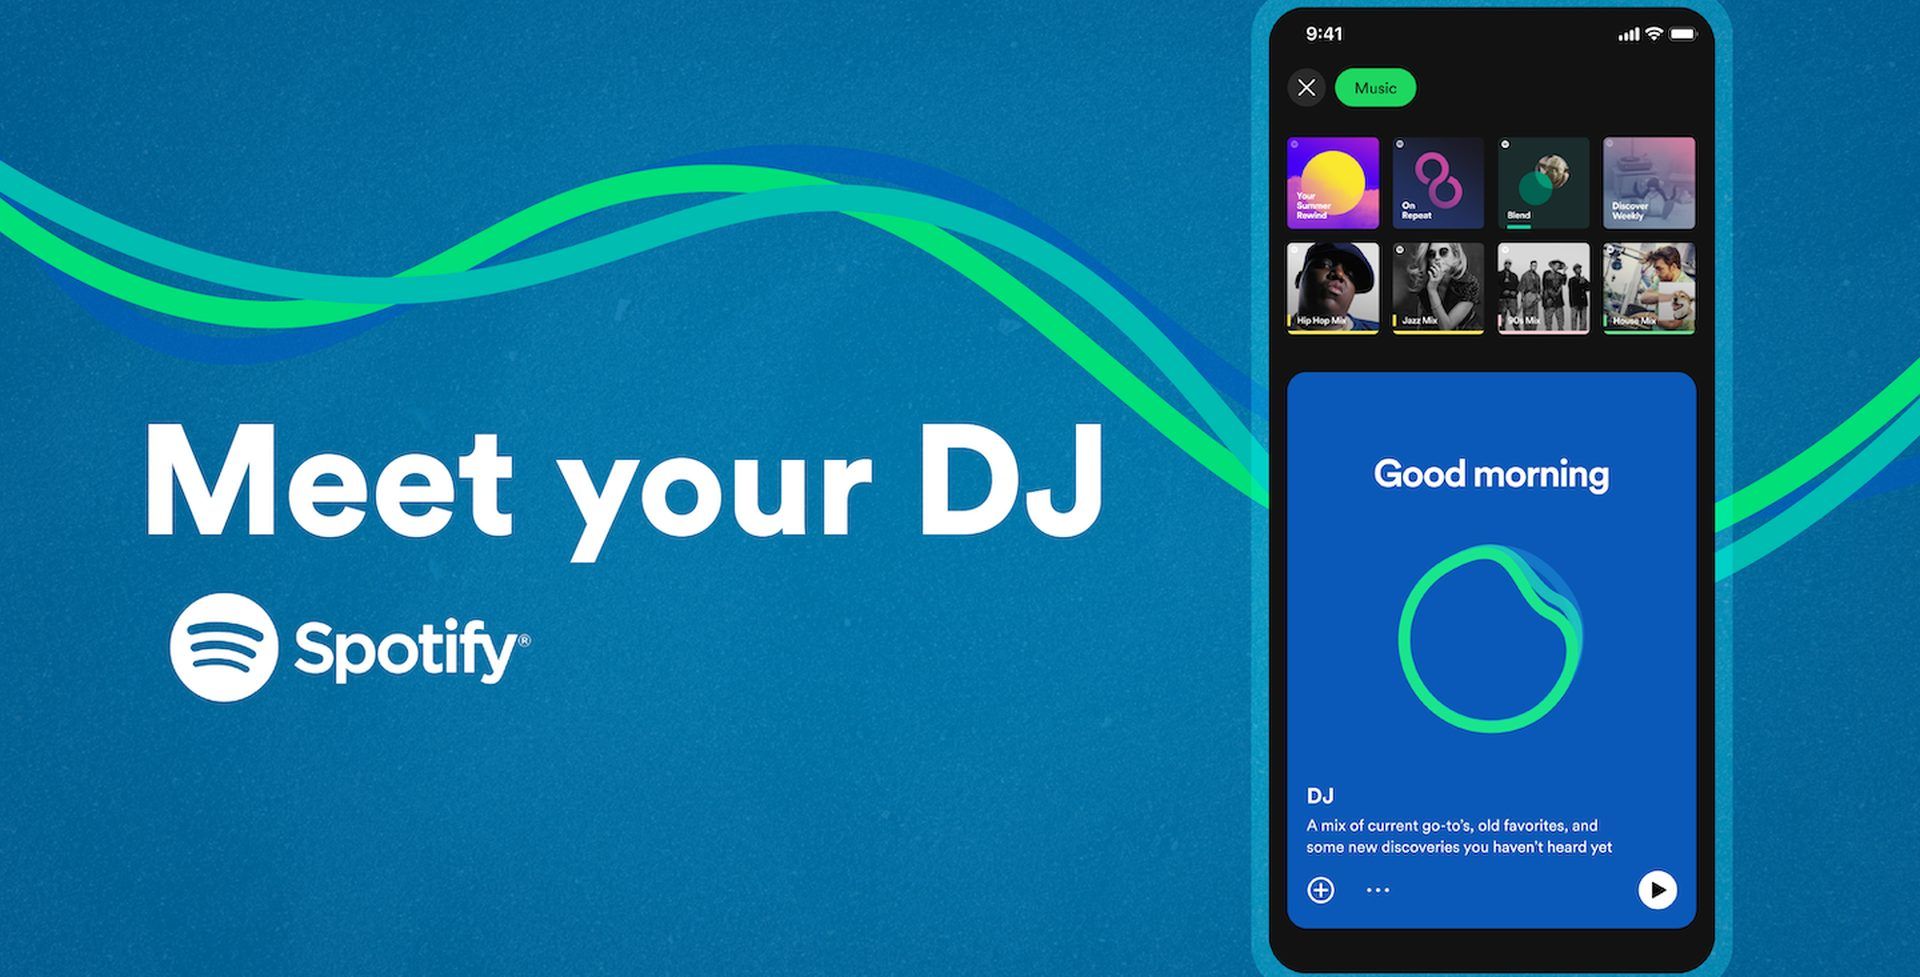 How to get Spotify AI DJ: Learn how to use Spotify AI DJ on desktop and app. If Spotify AI DJ not showing up, we know how to fix it. Keep reading